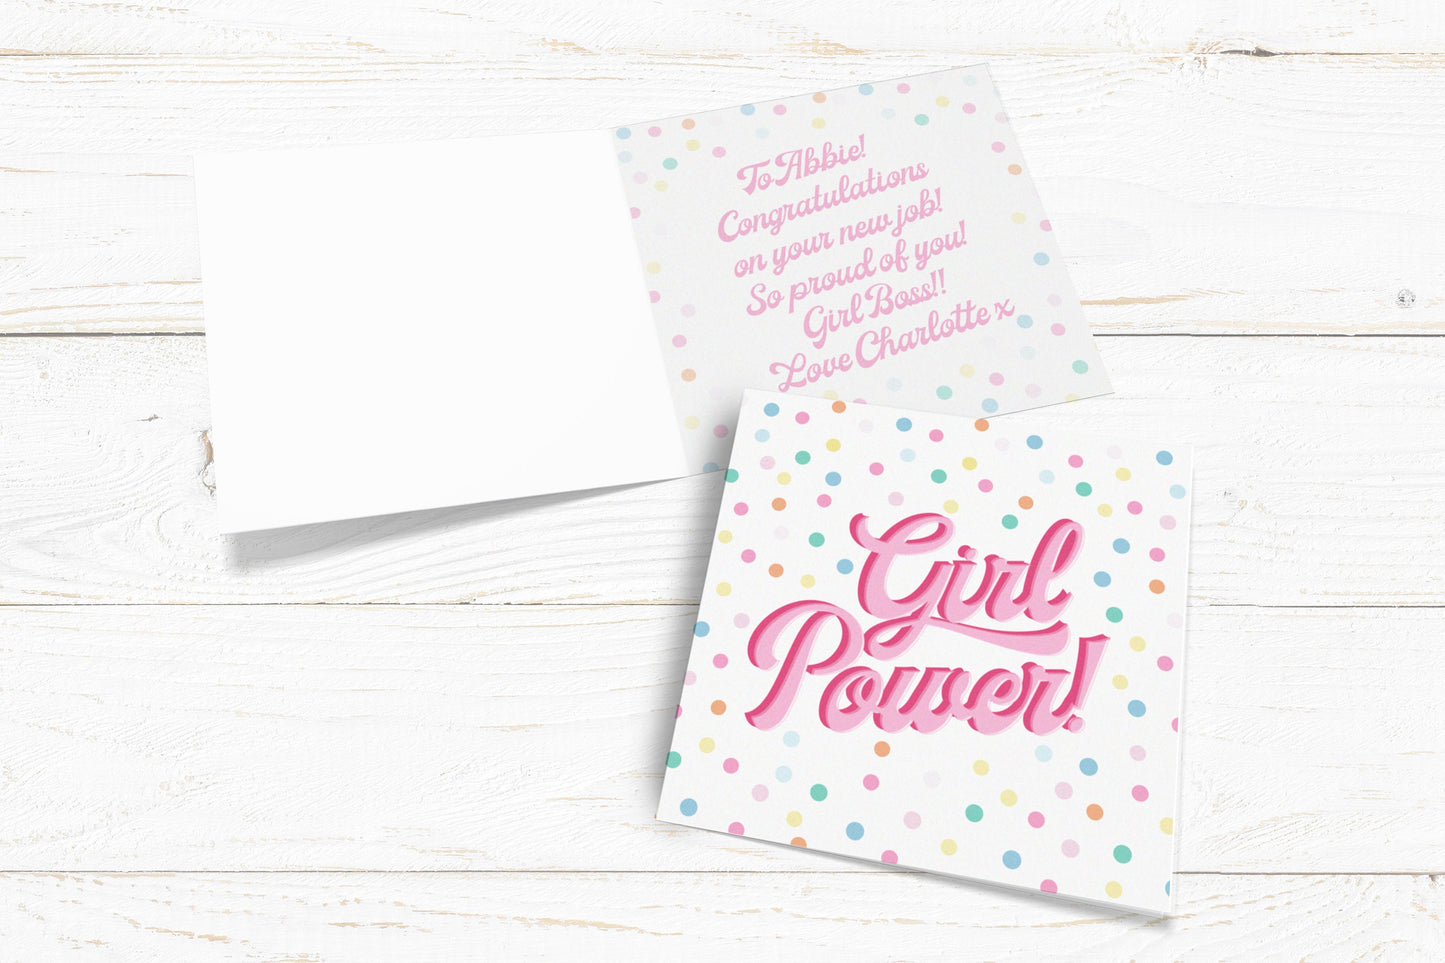 Girl Power Card. Well Done Card. Passed Exams Card. Congratulations. New Job. Send Direct Option.